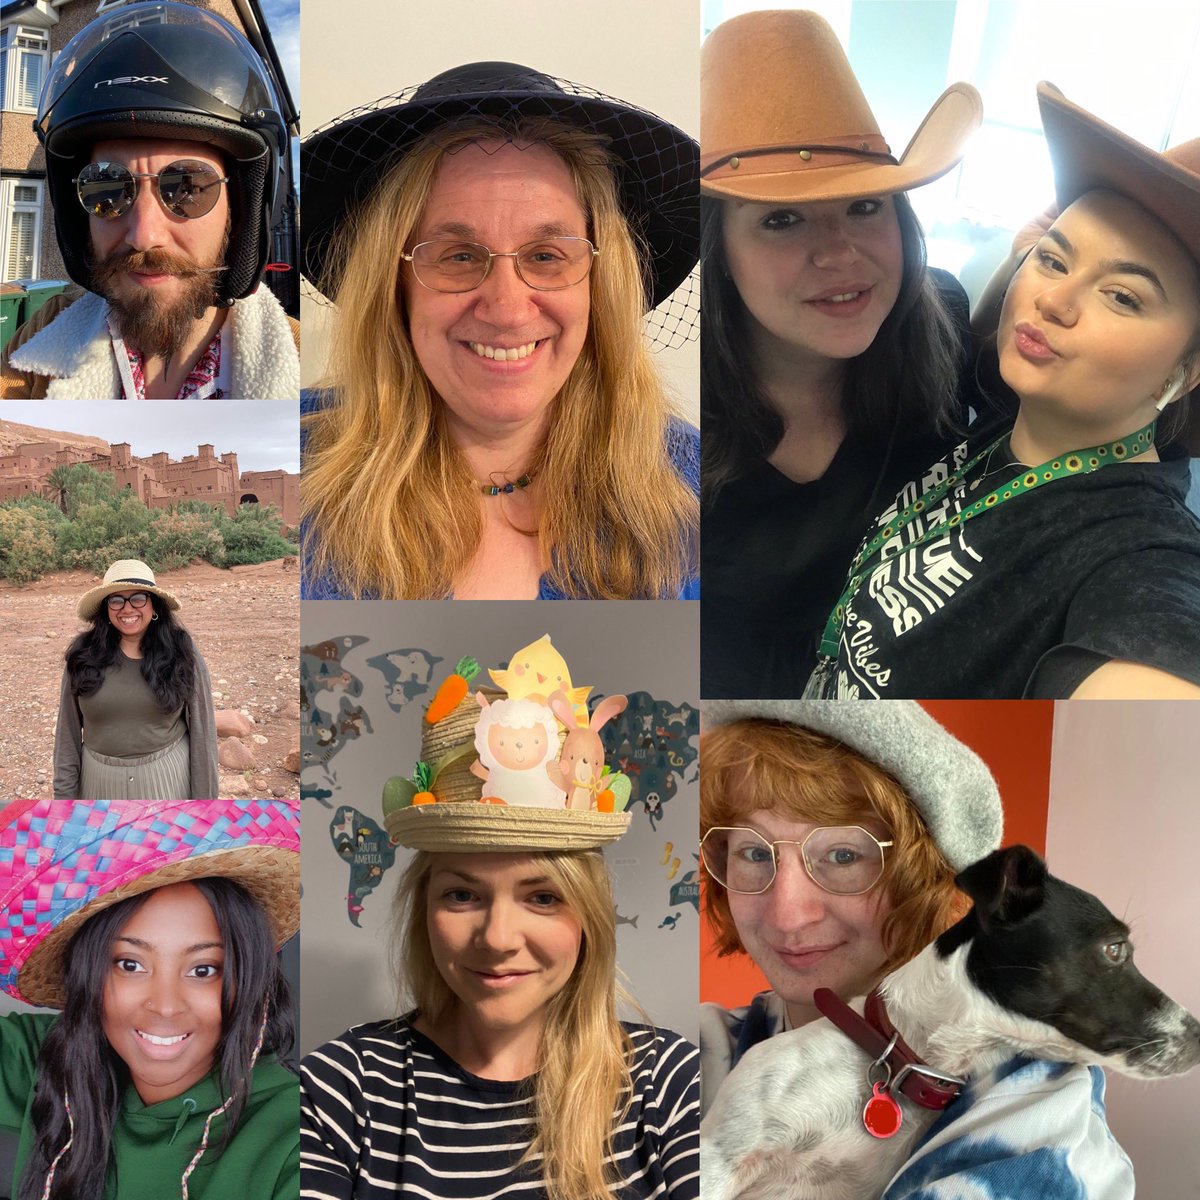 Our fantastically fashionable @Shoosmiths #courtofprotection team donning their favourite headware for #HatsForHeadway to support the invaluable work that @HeadwayUK does to support #braininjurysurvivors text HFHW5 to 70085 to donate